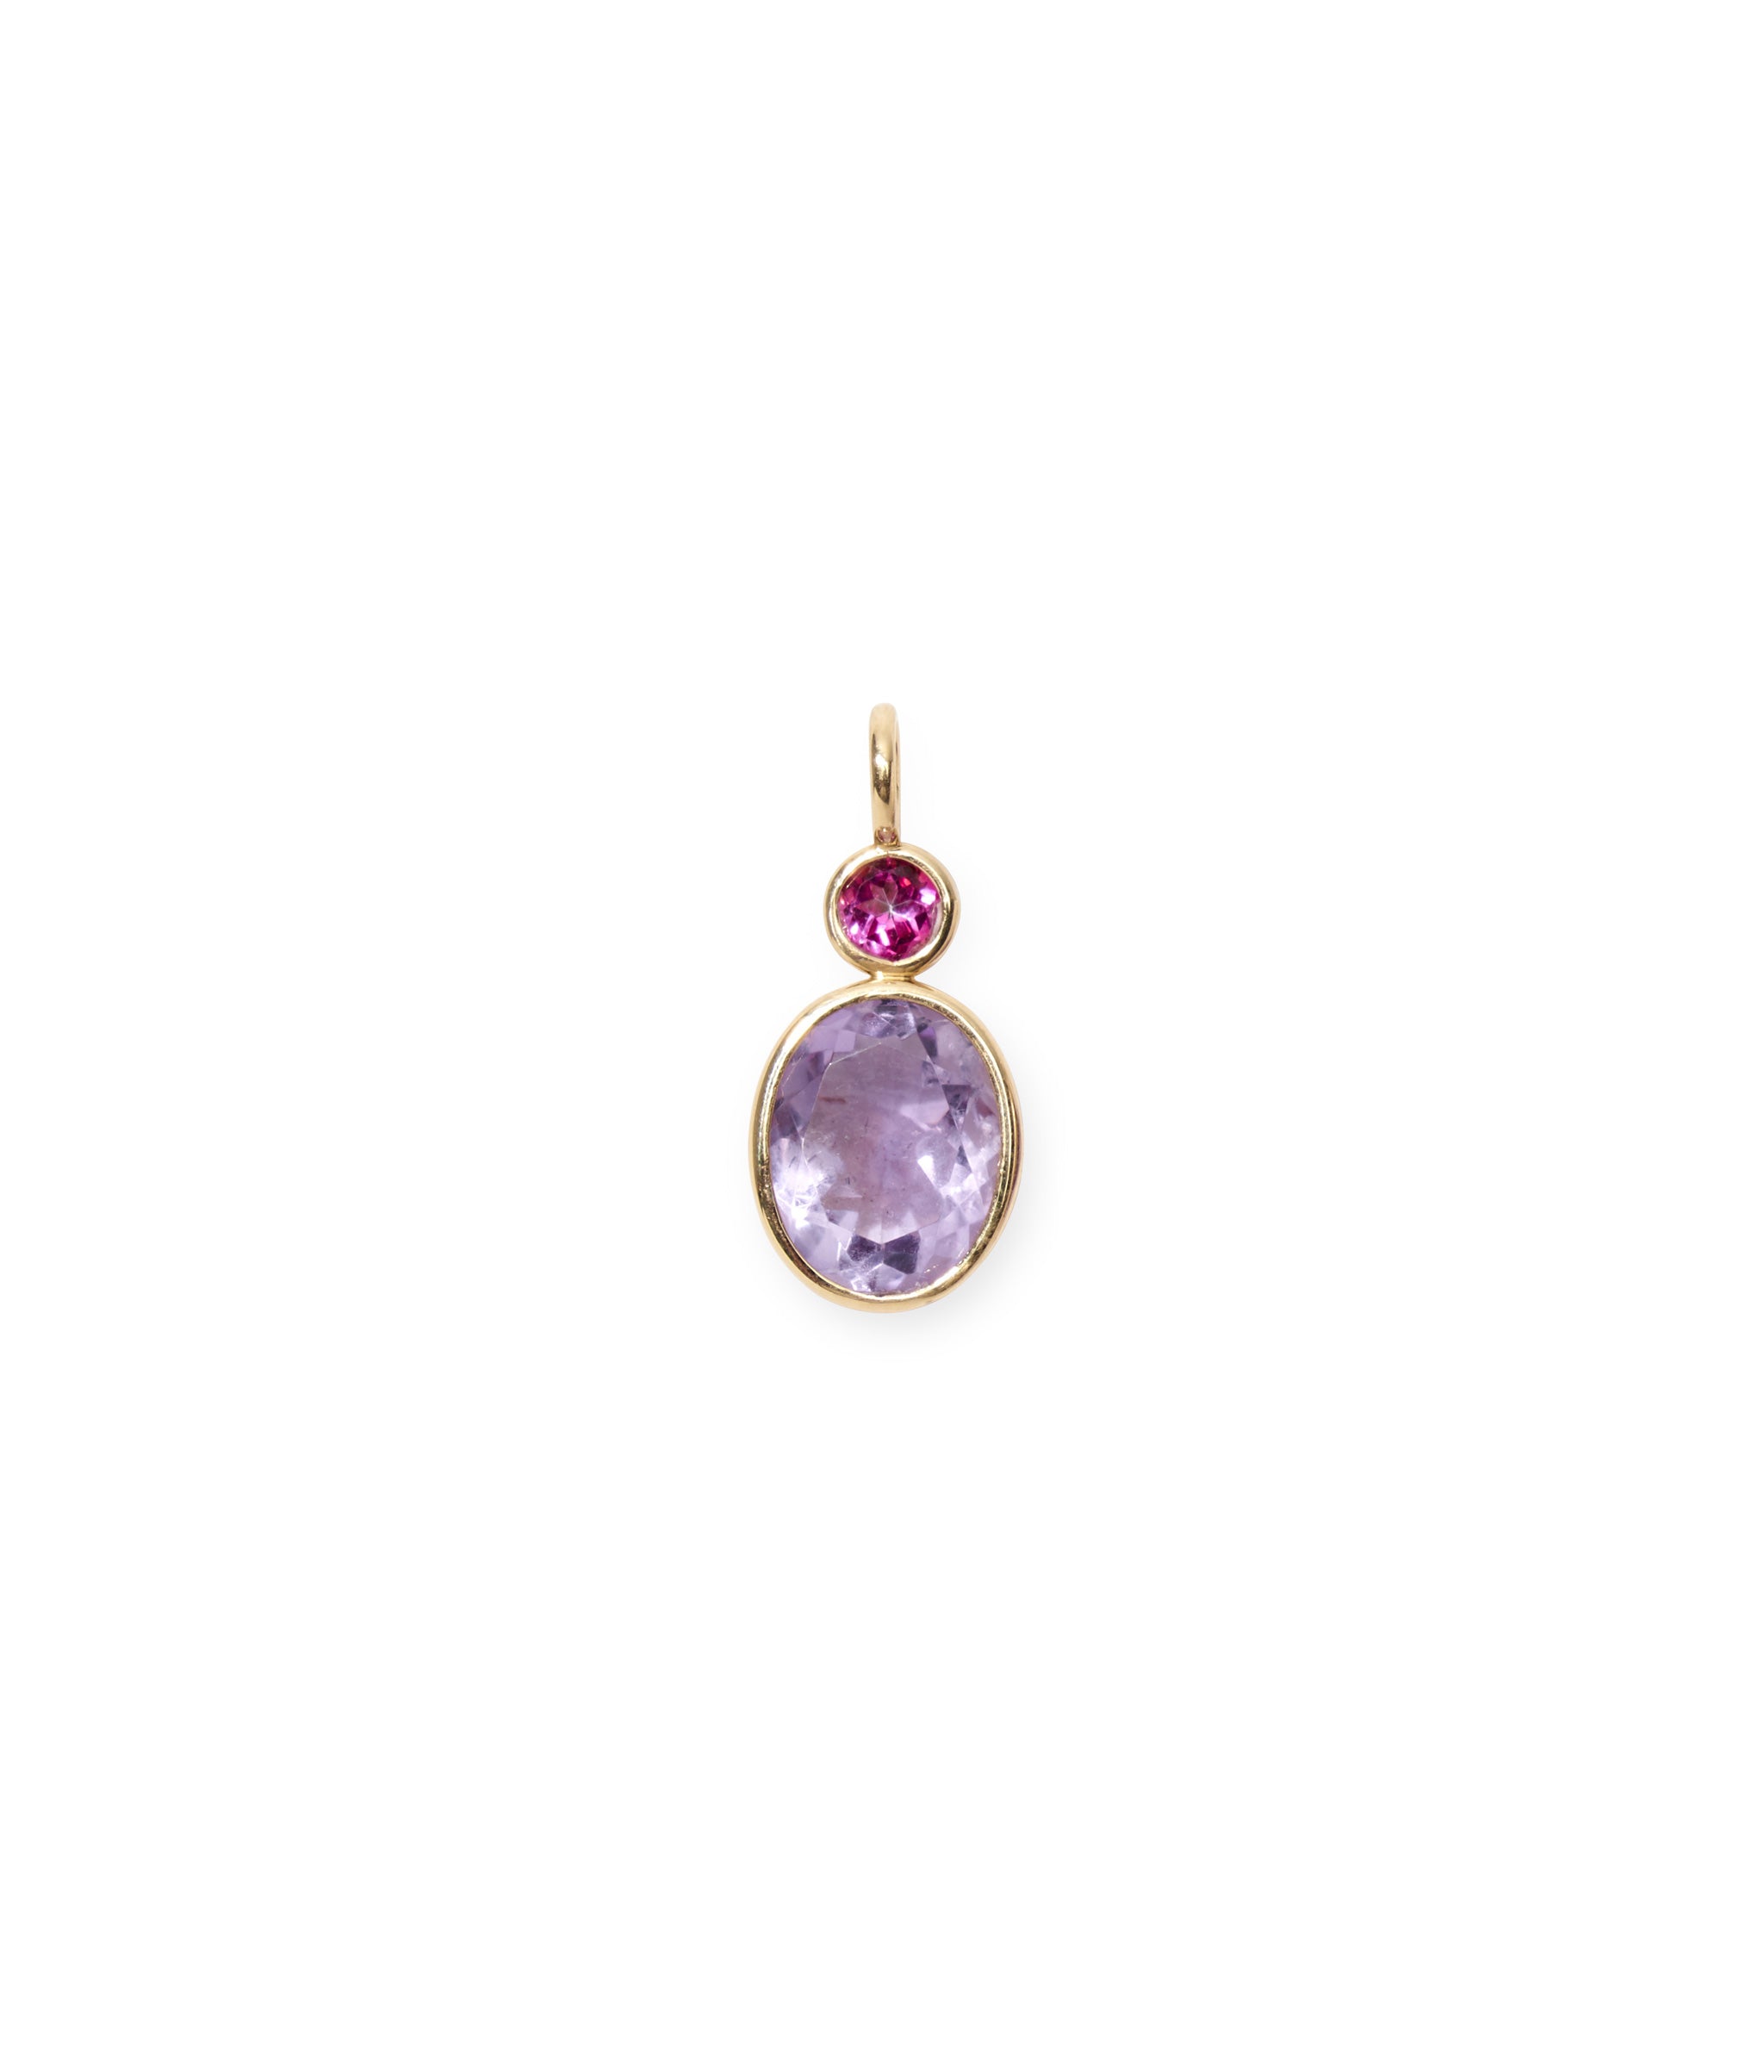 Pink Topaz & Light Pink Amethyst 14k Gold Necklace Charm. Faceted pink topaz round with amethyst oval and gold bezels